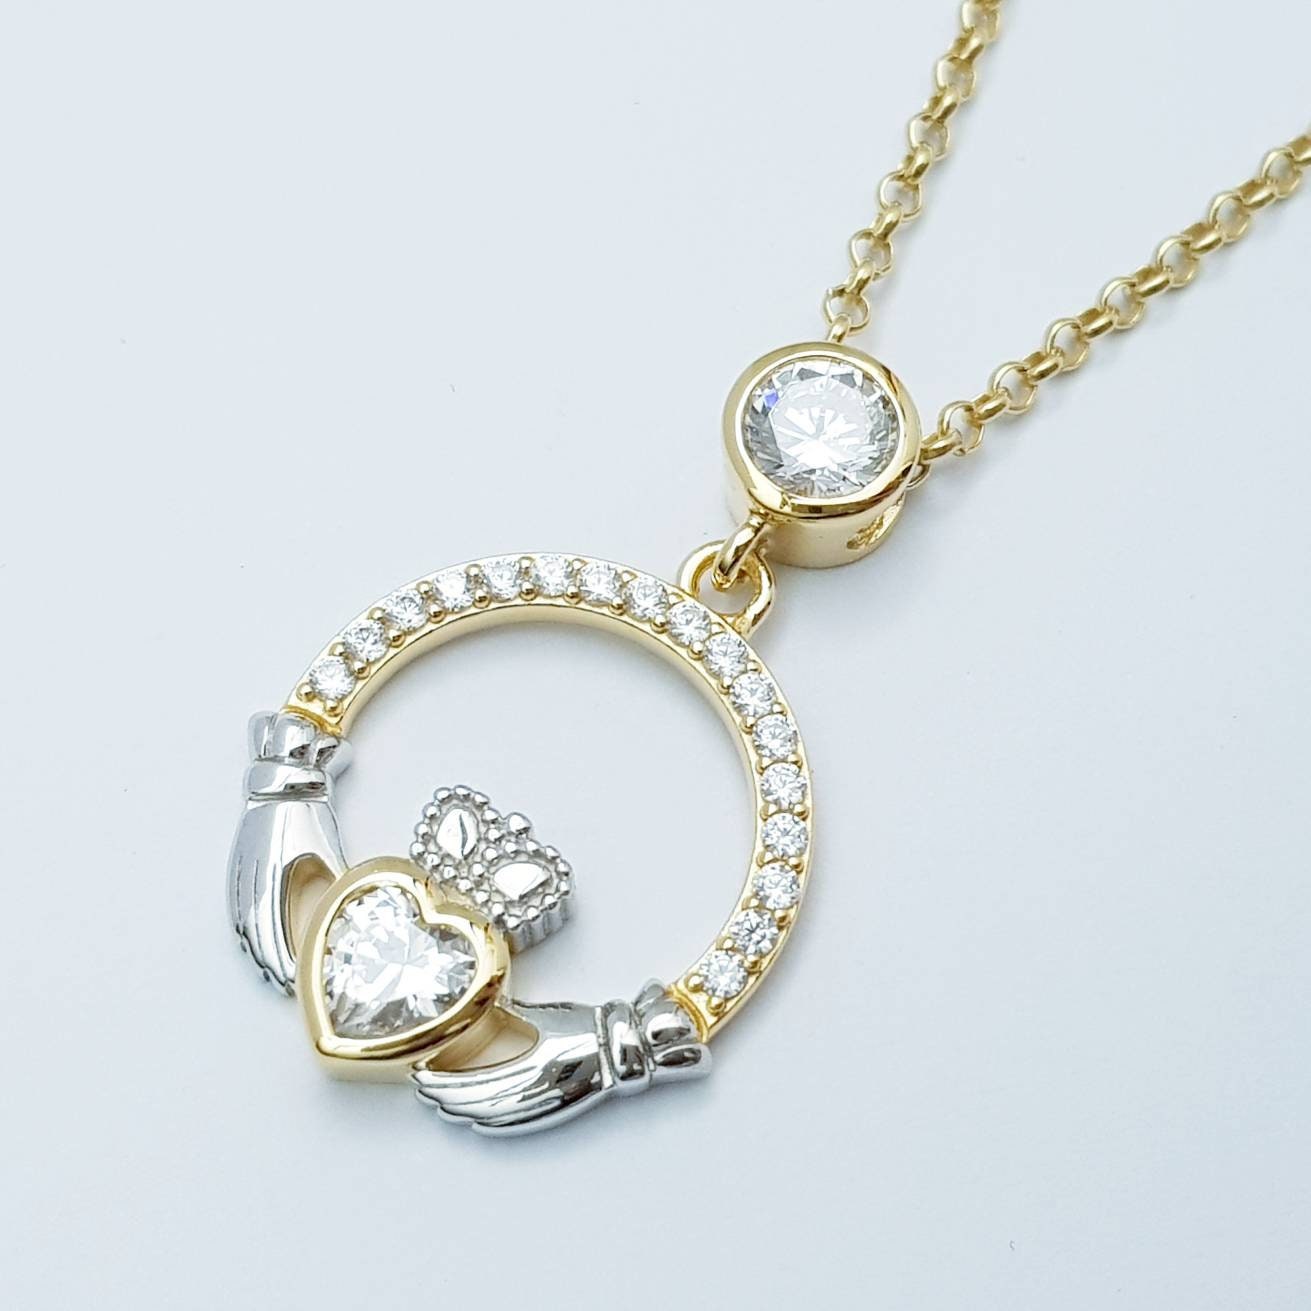 925 Silver Claddagh pendant, Irish claddagh necklace from Galway, silver and yellow gold claddagh pendant